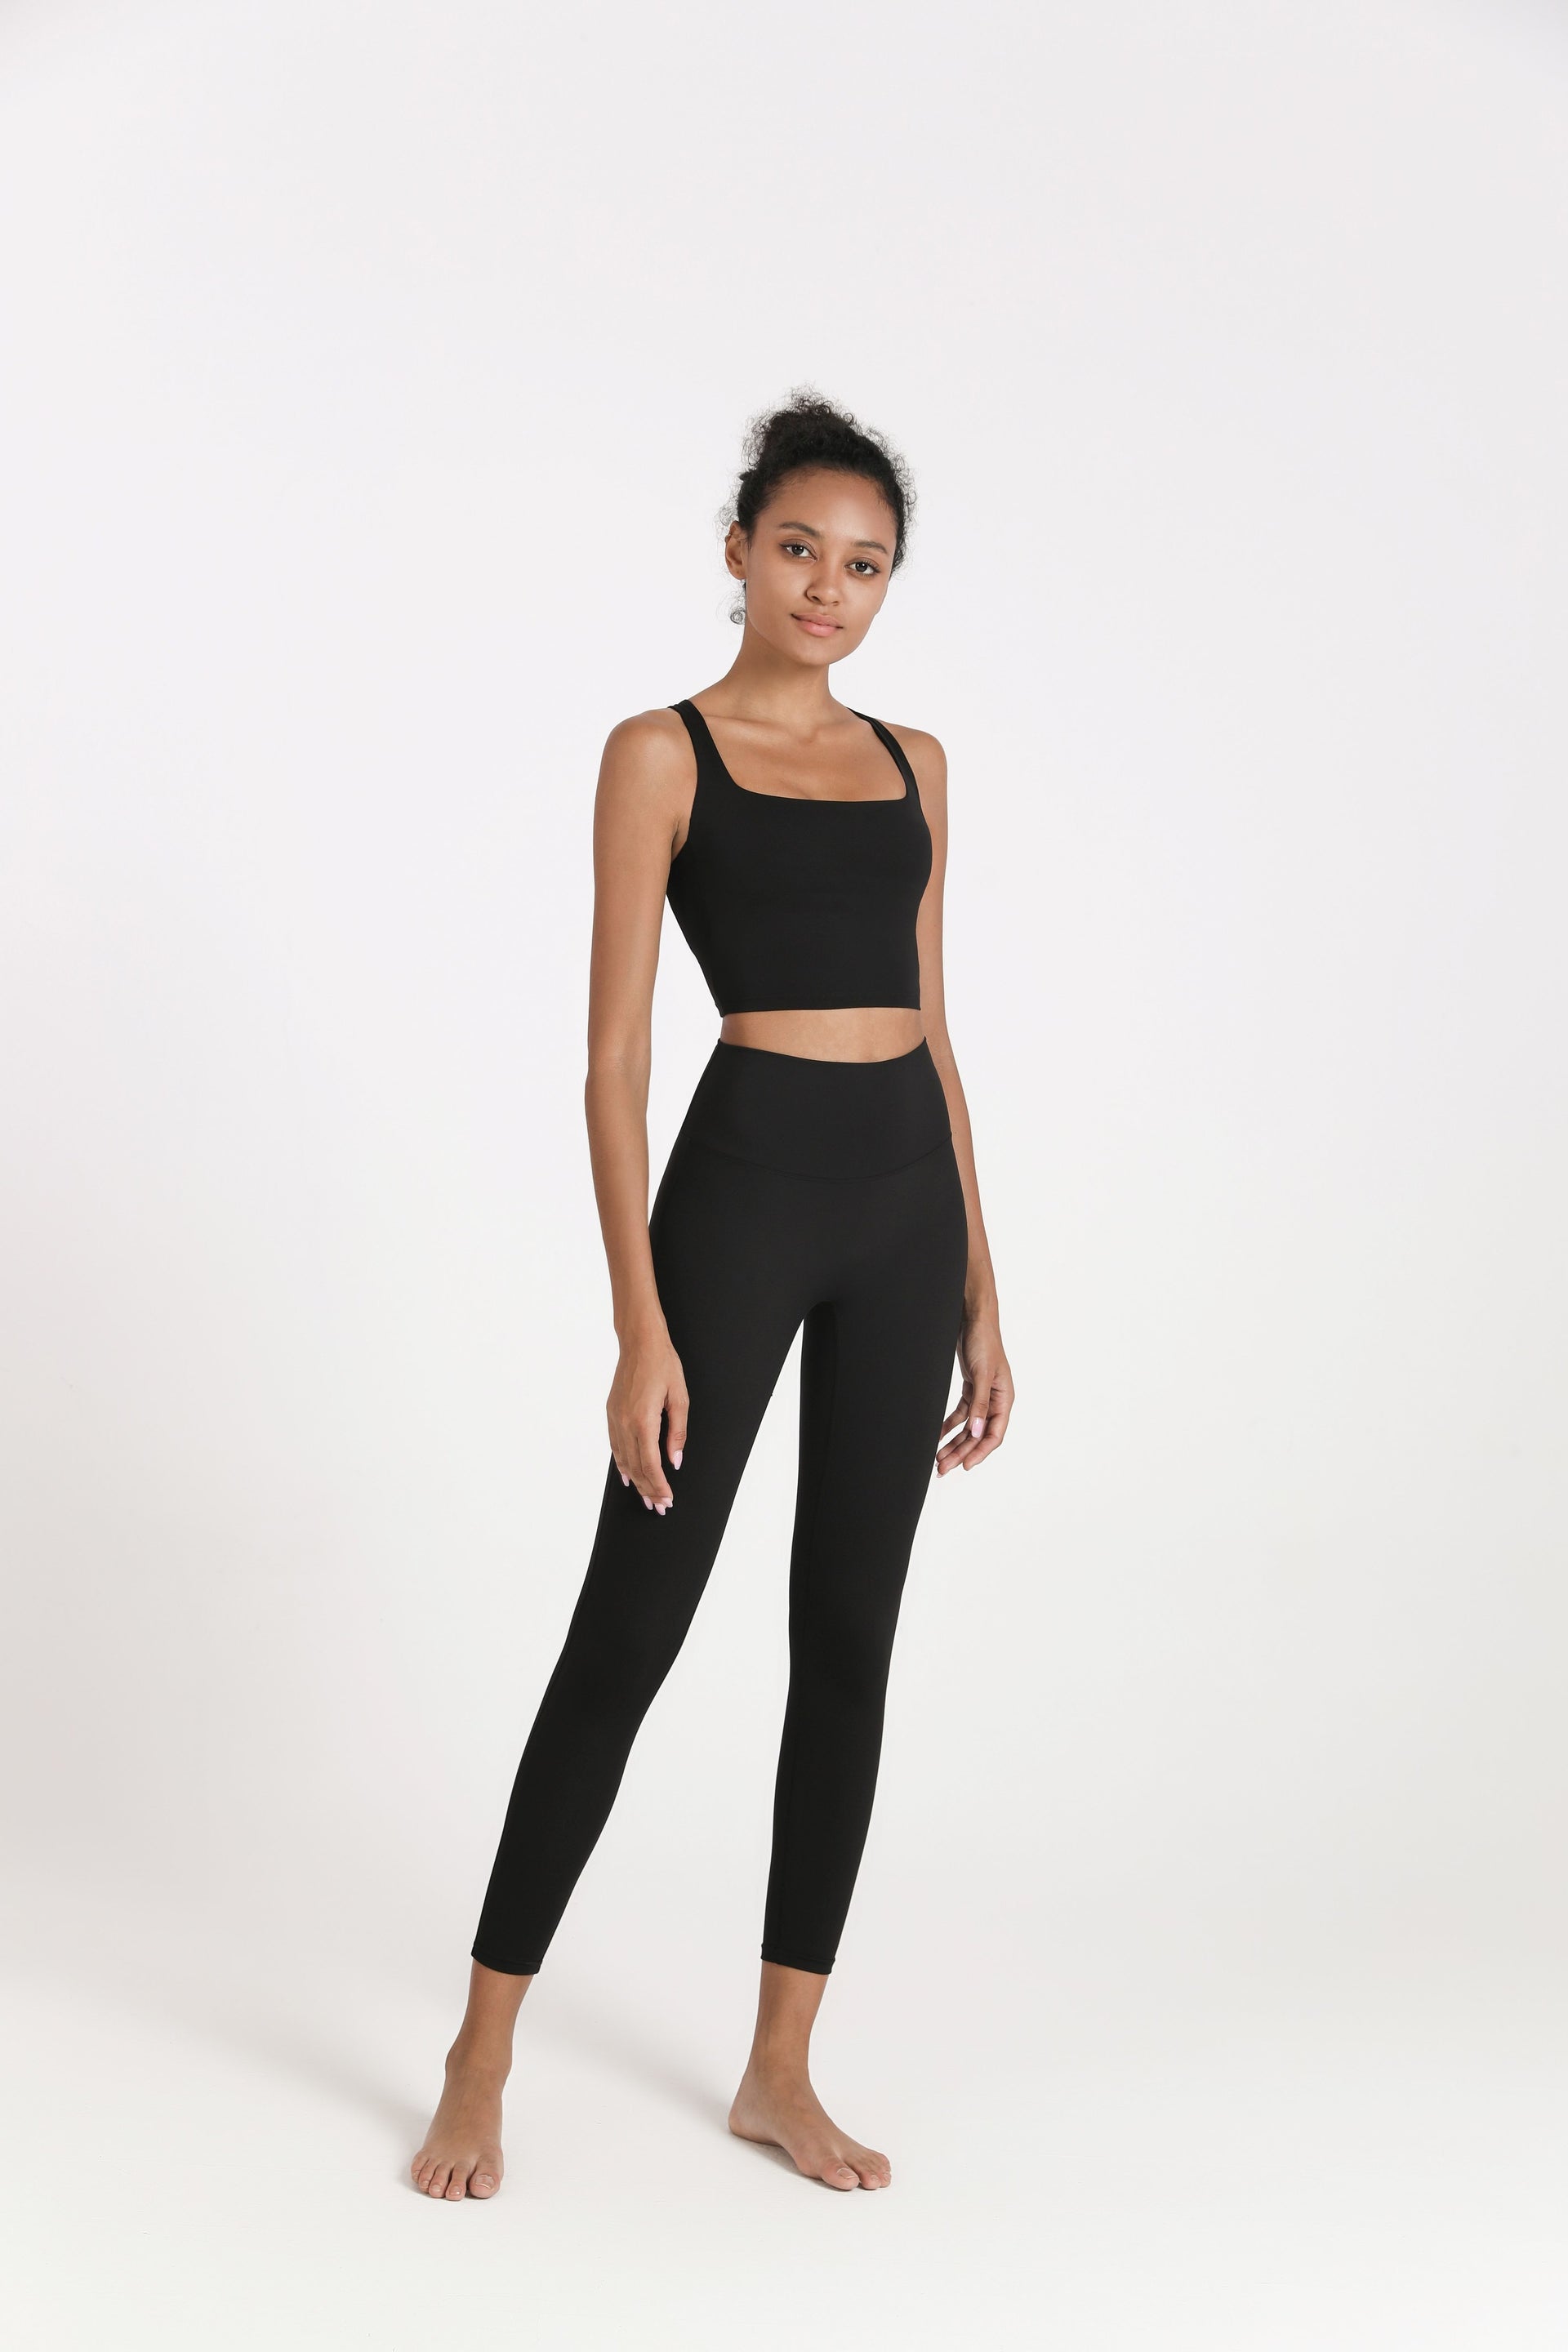 The Move-With-you Bra – Manifest Sportswear